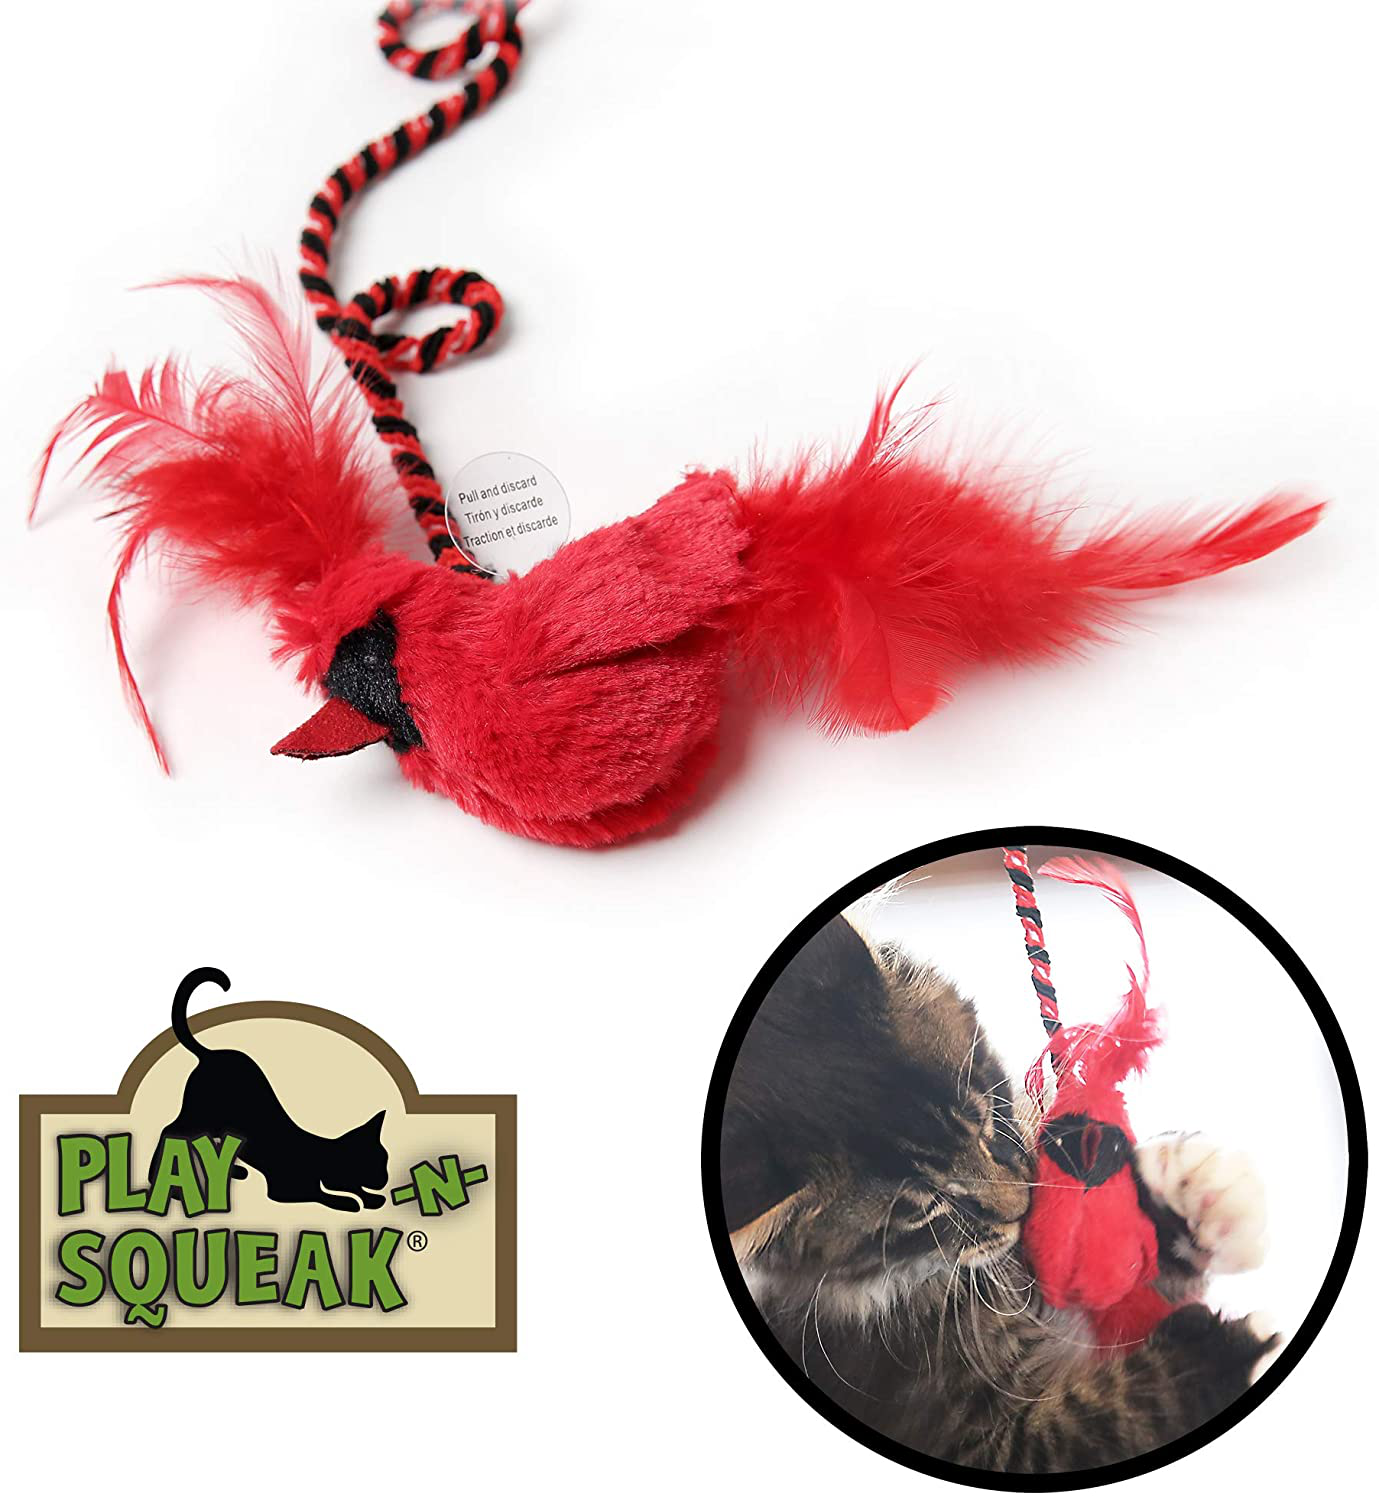 Ourpets Play-N-Squeak Real Birds Cat Toys (Cat Toys for Indoor Cats, Catnip Toys, Catnip Toys for Cats with Real Chirping Bird Electronic Sound) [Interactive Cat Toys for Indoor Cats with Catnip]